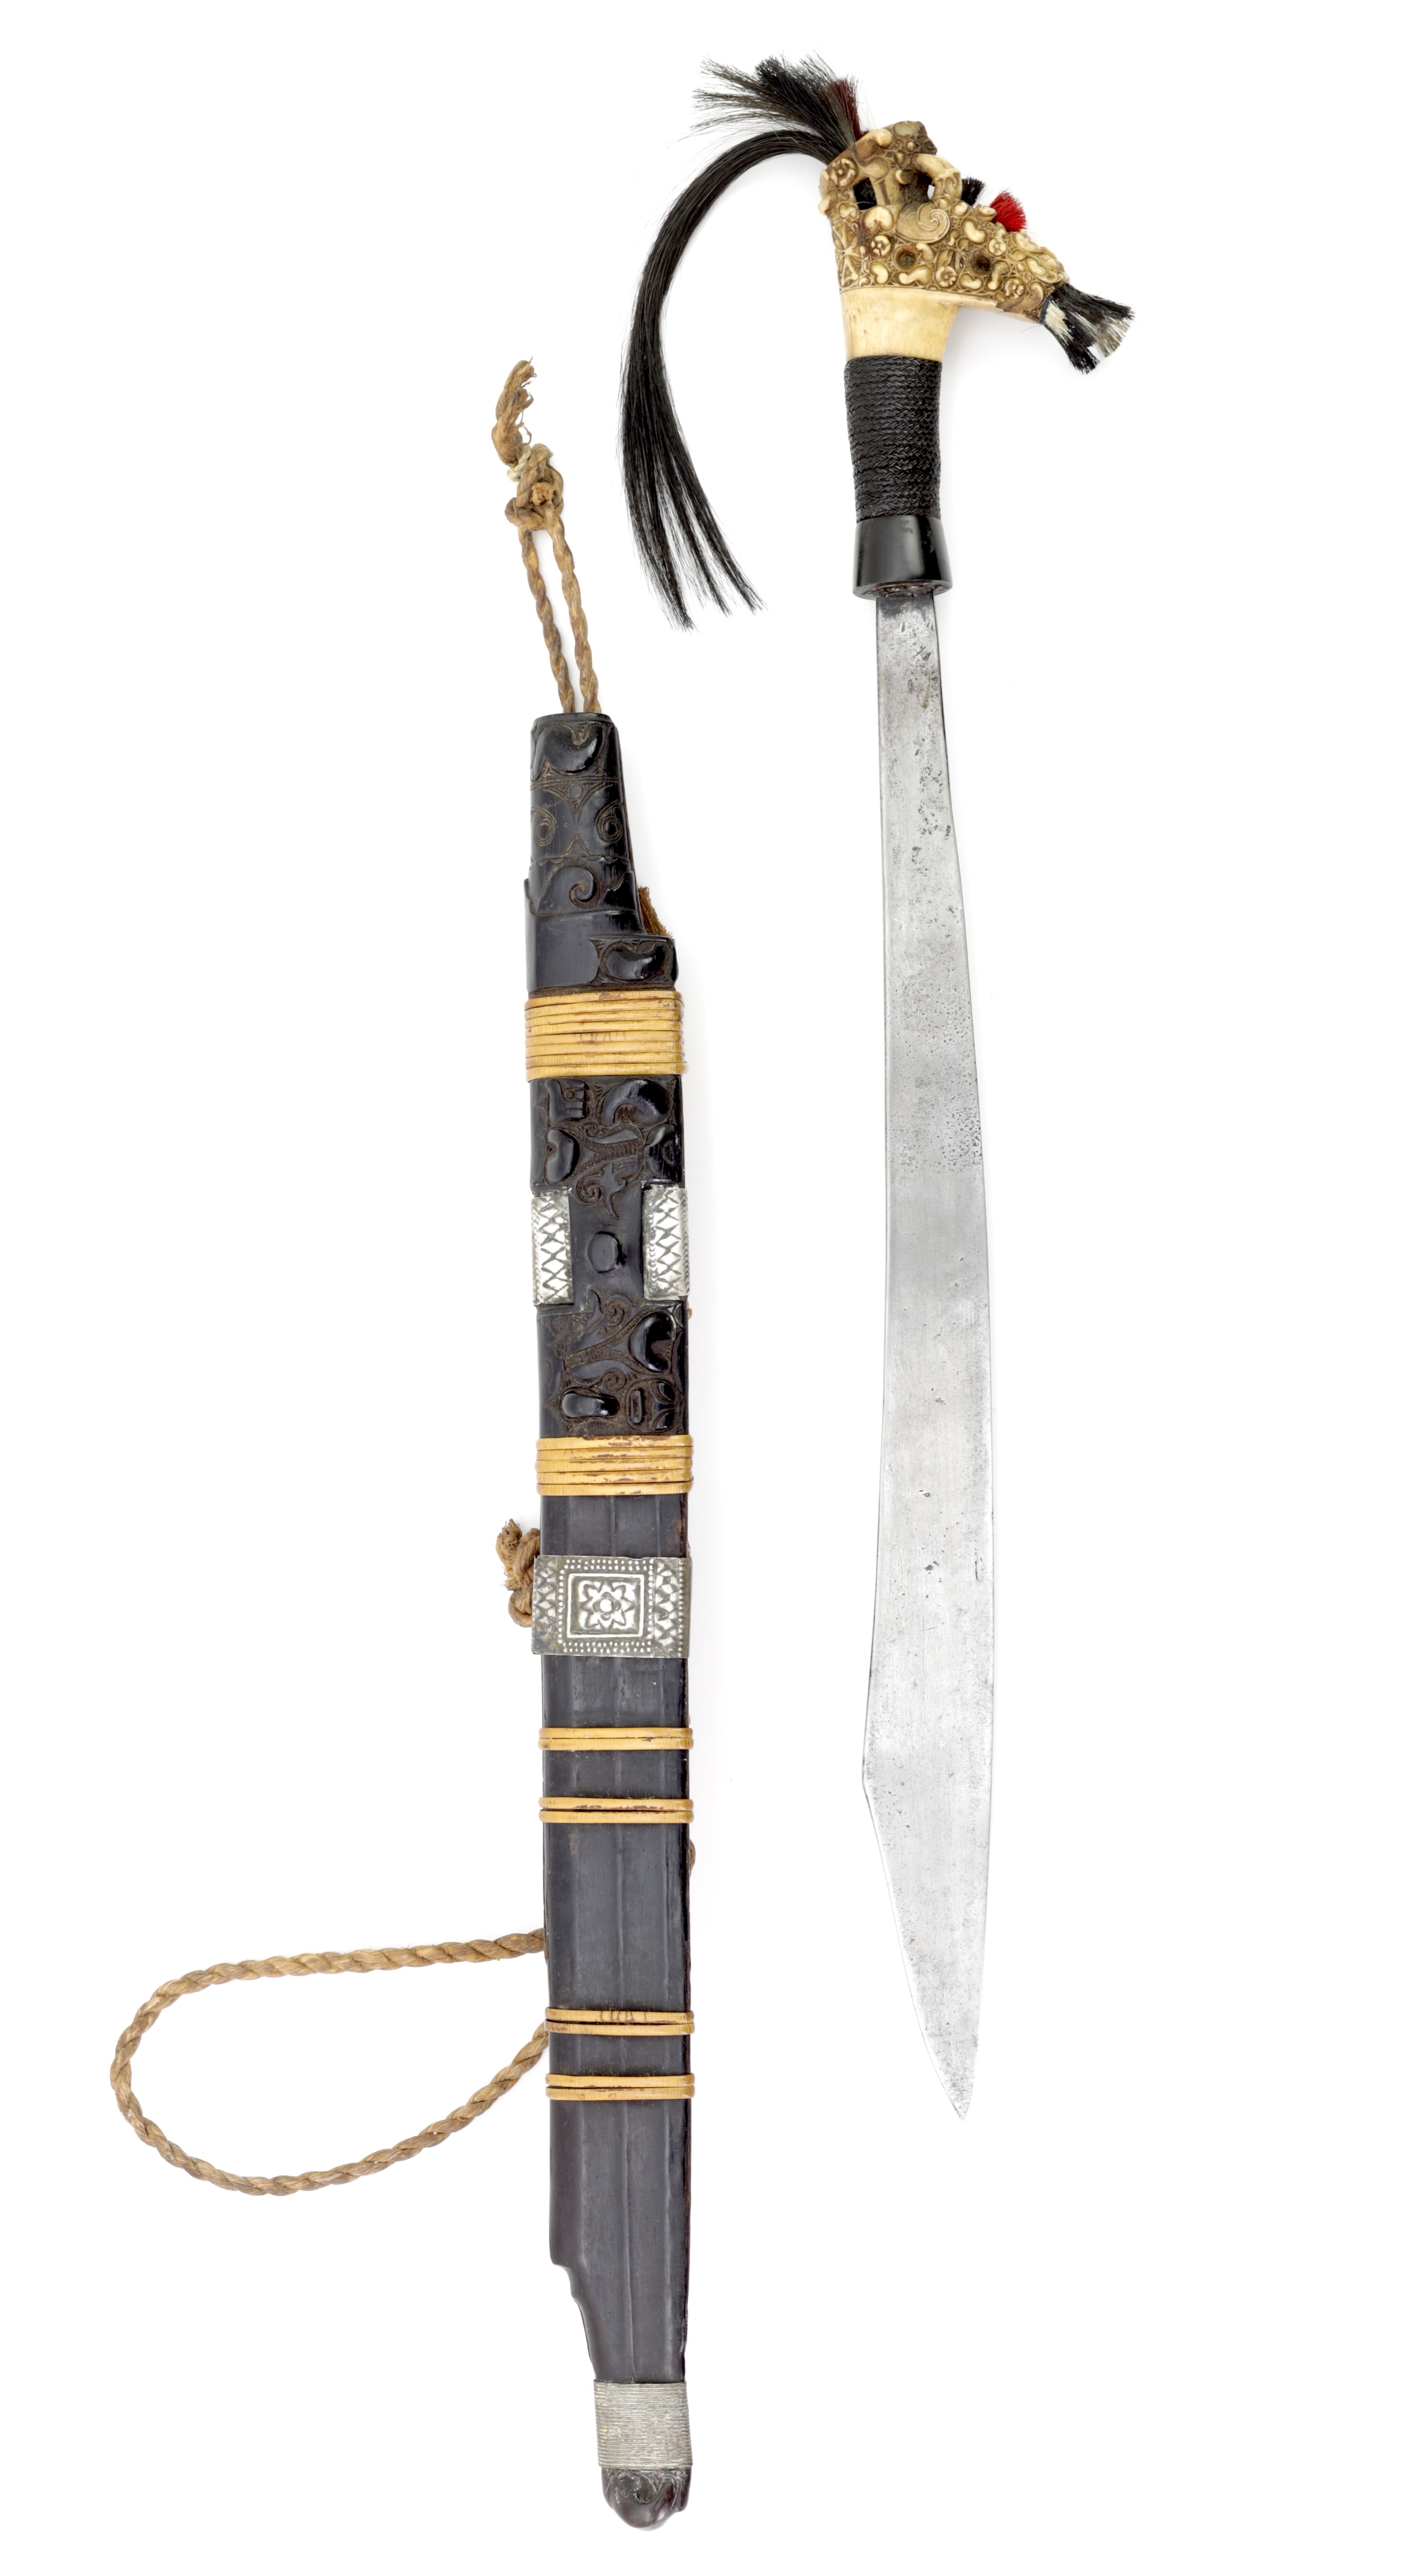 A fine Dayak headhunter sword with an exceptionally carved hilt.